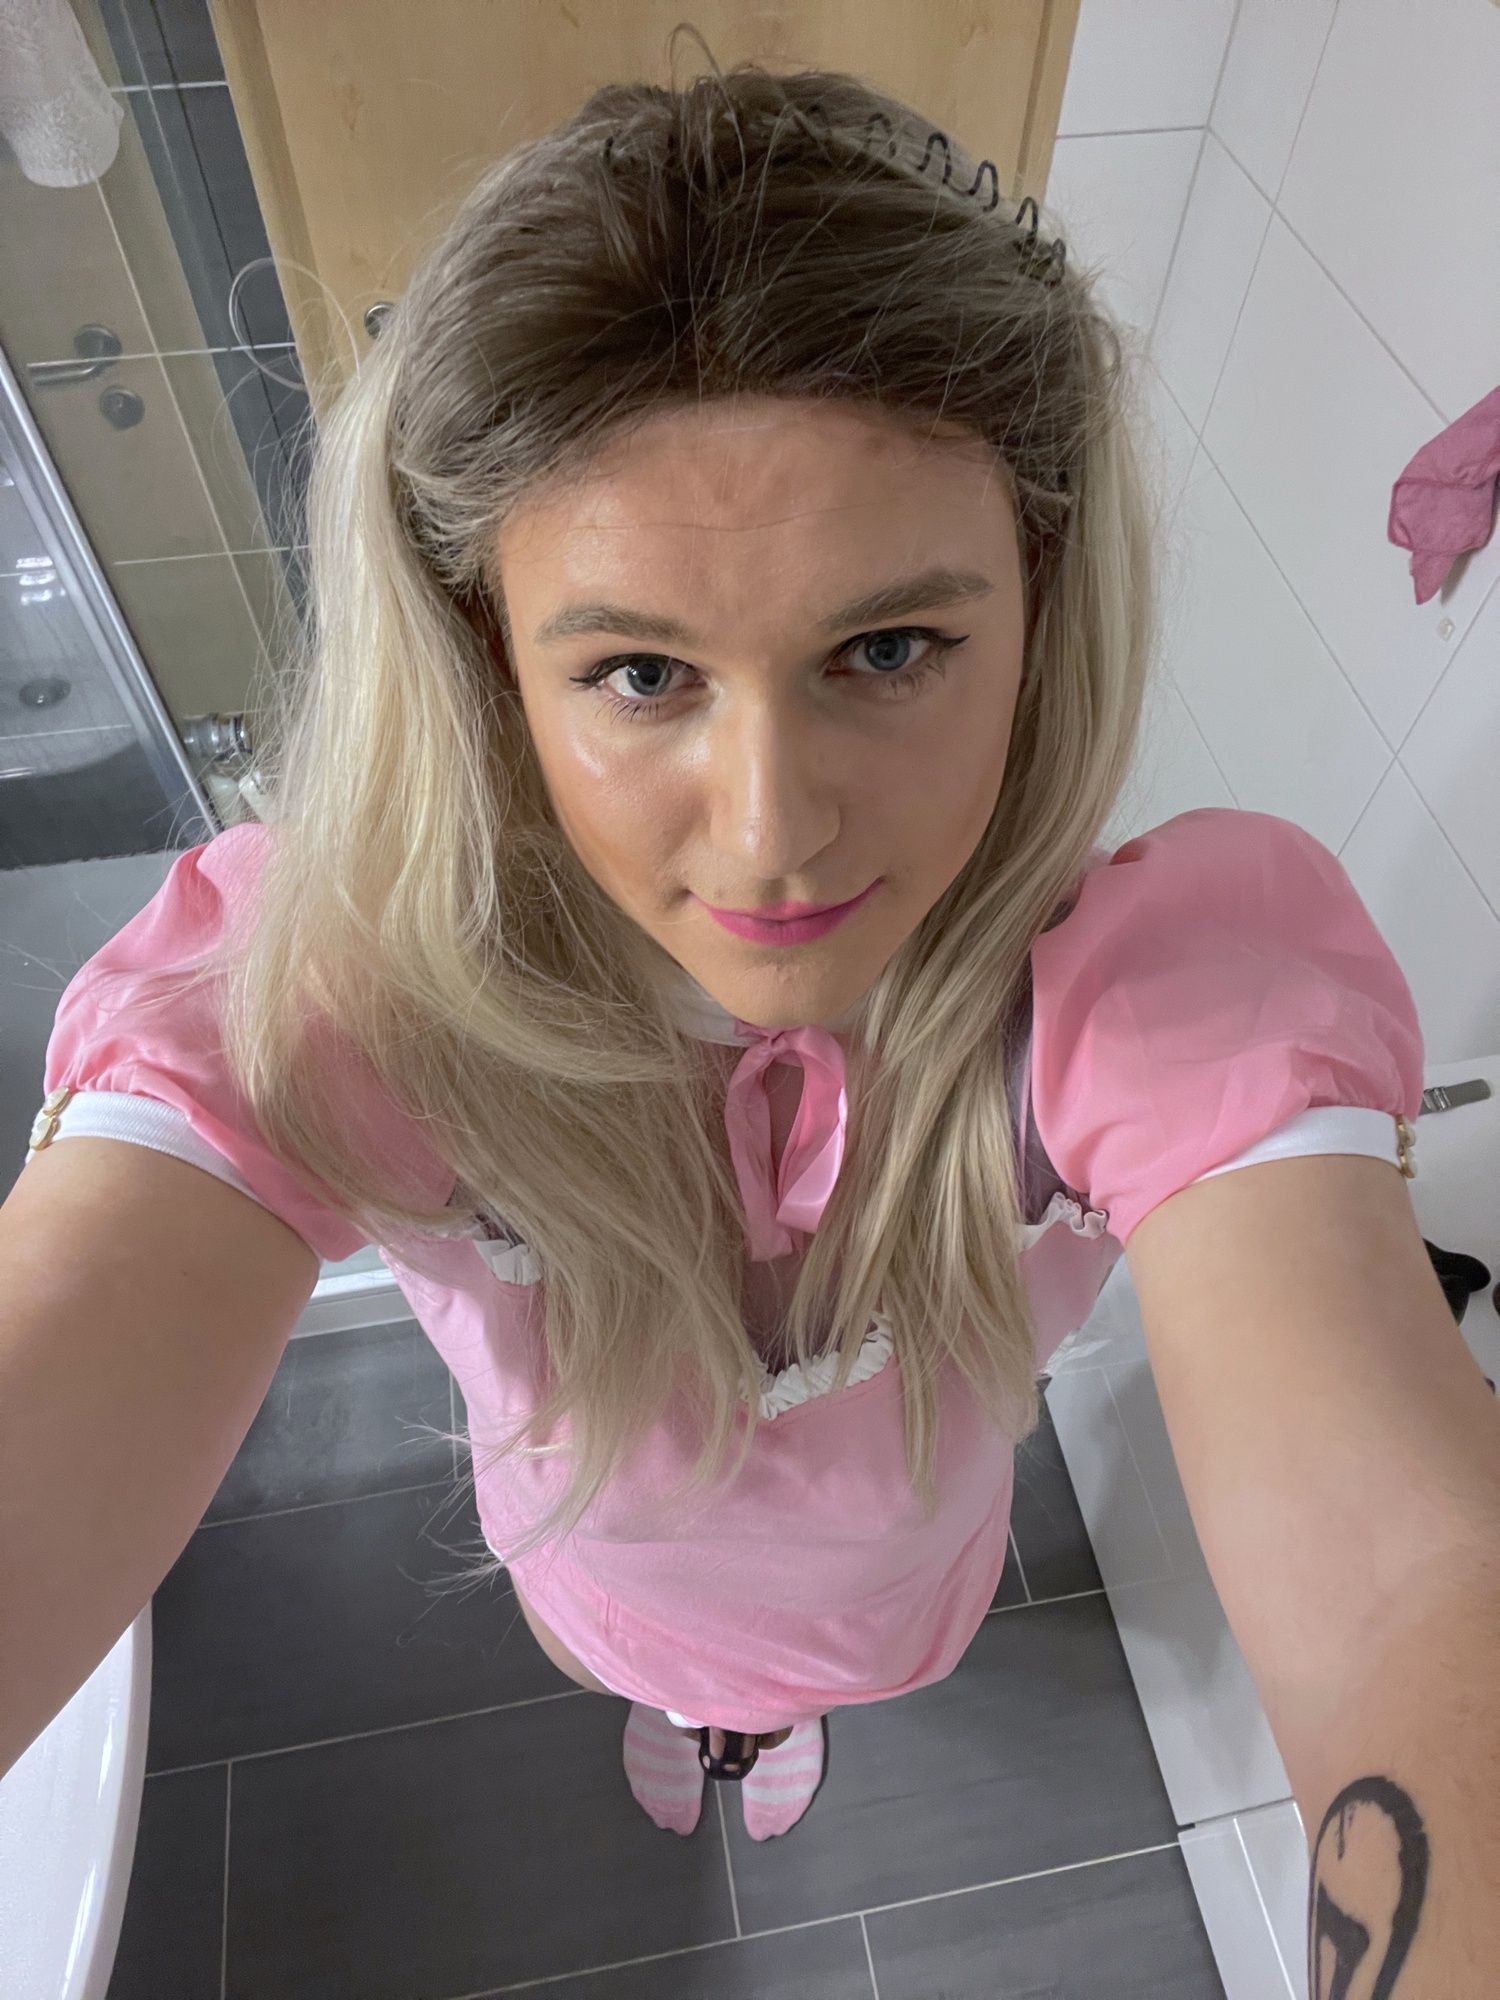 Sissy vallicxte in pink #6